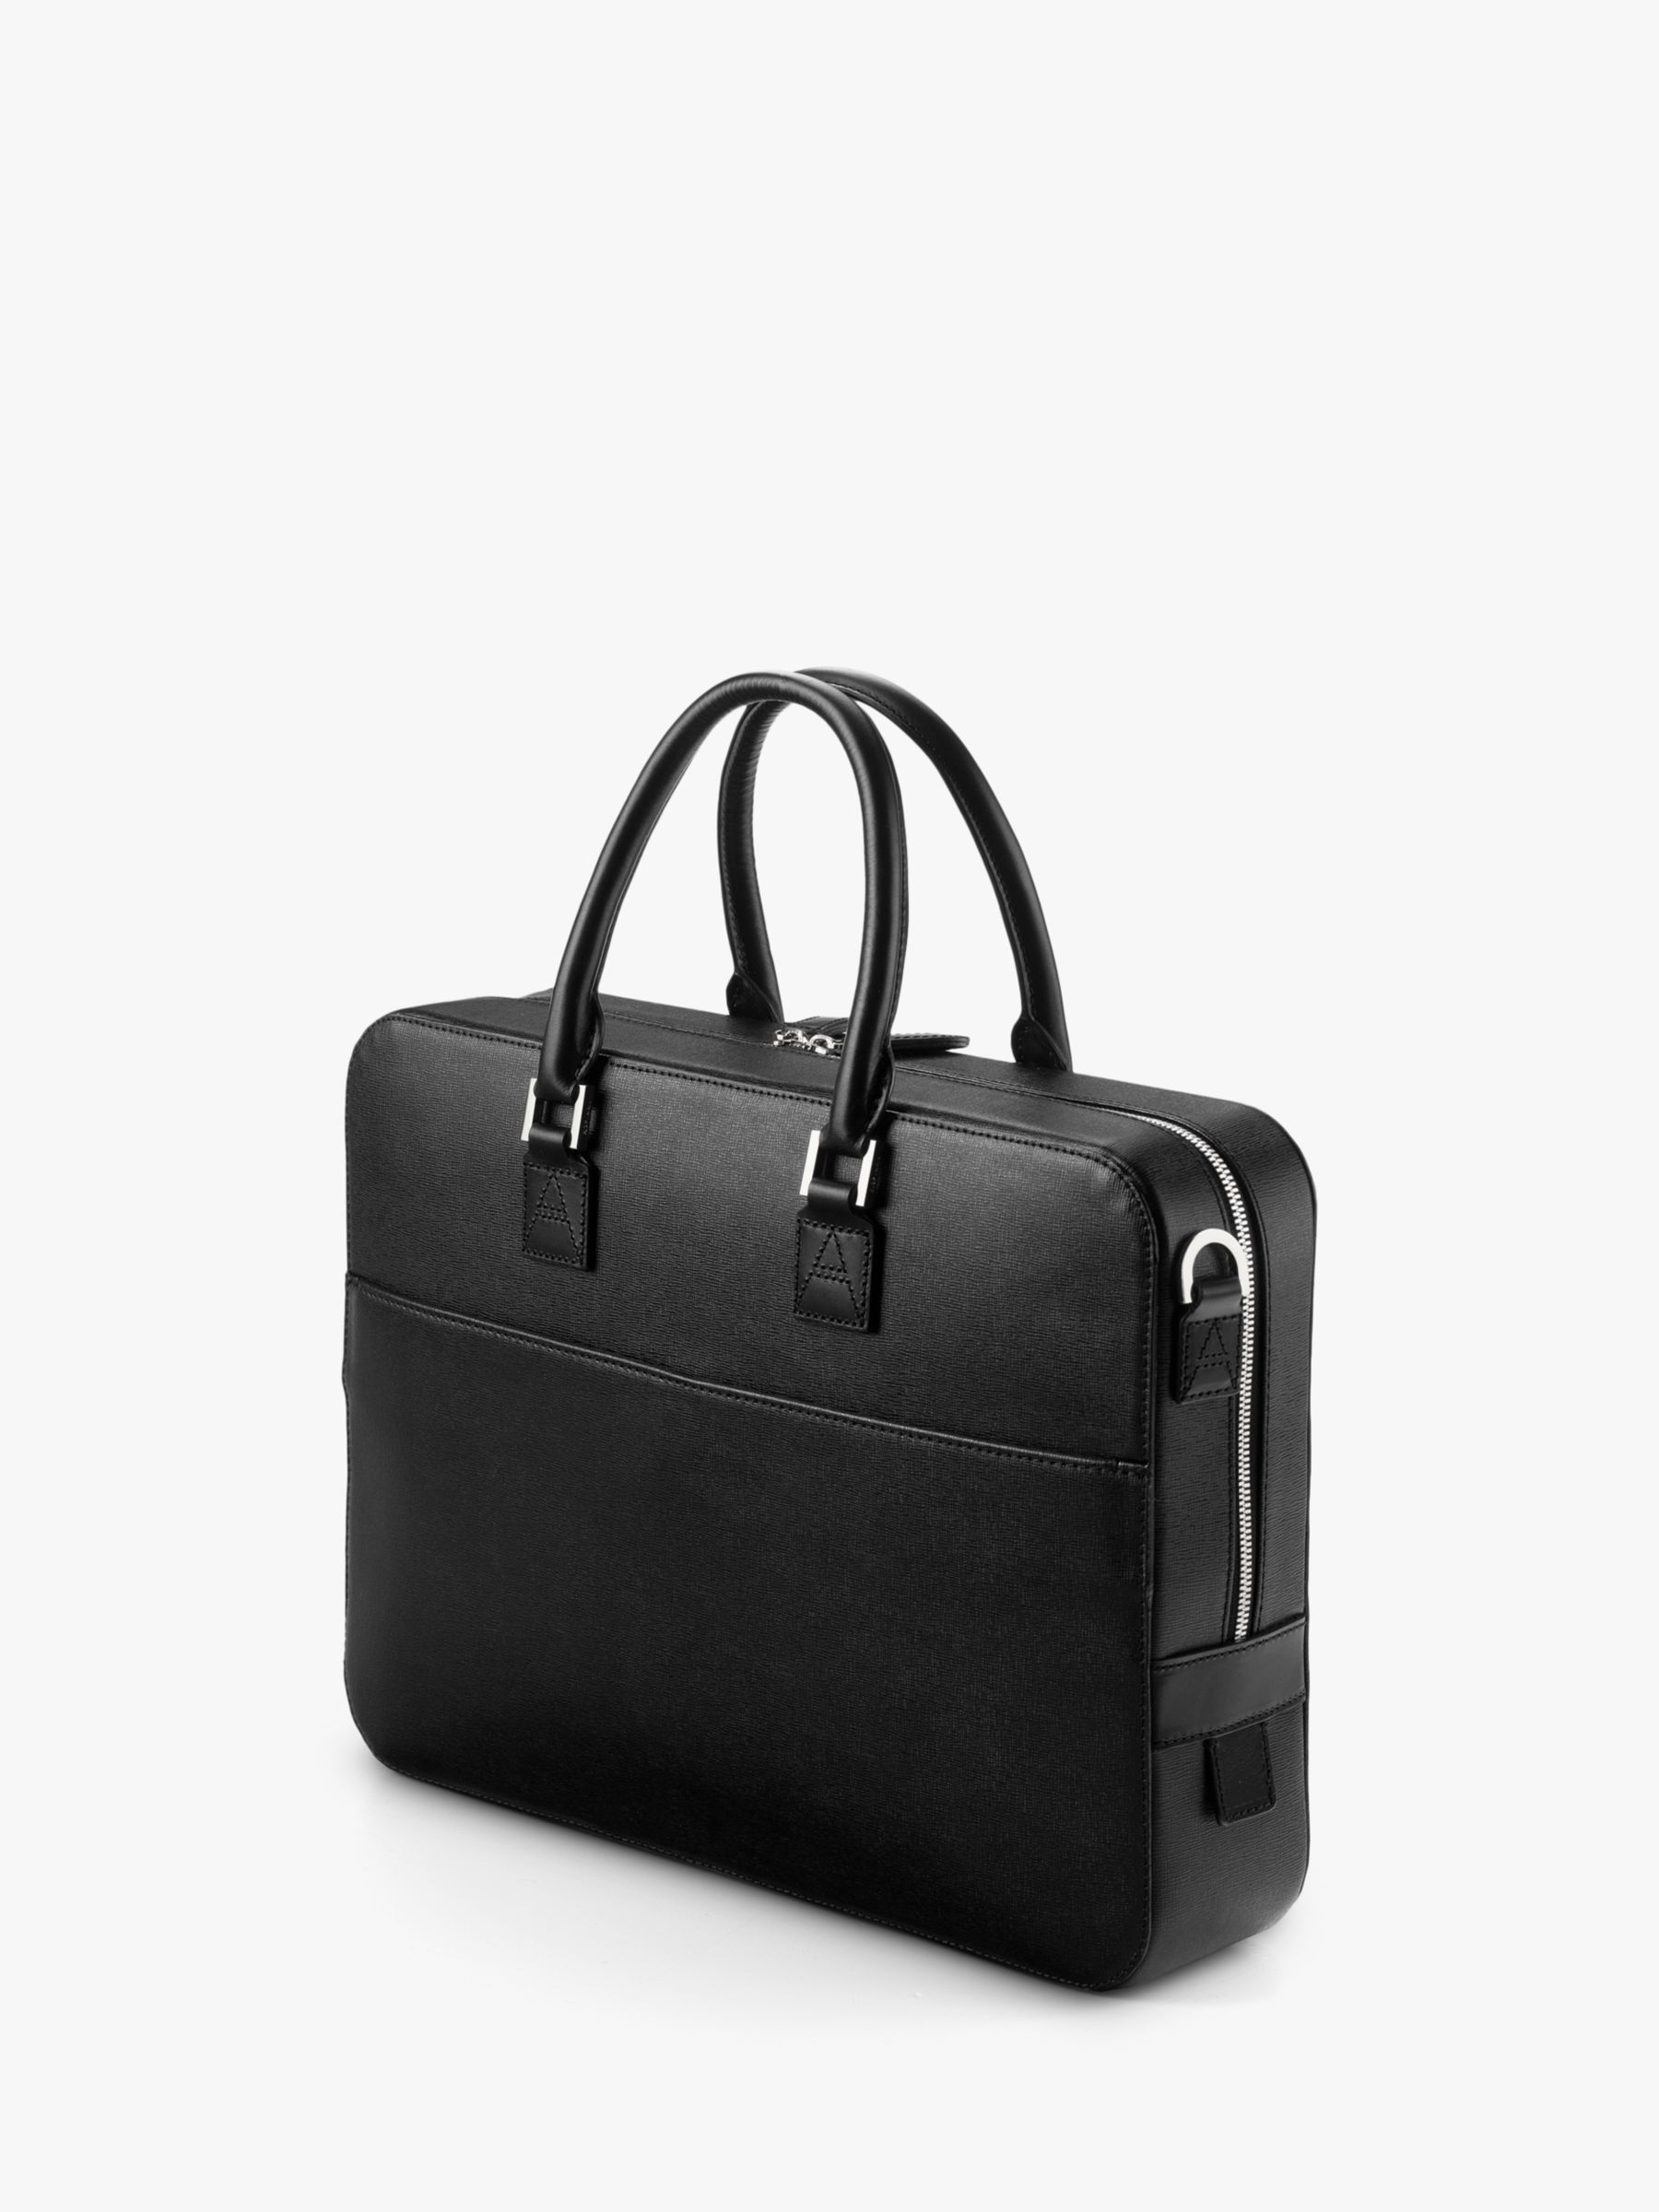 Aspinal of London Black Leather Saffiano Small Mount Street Laptop Bag